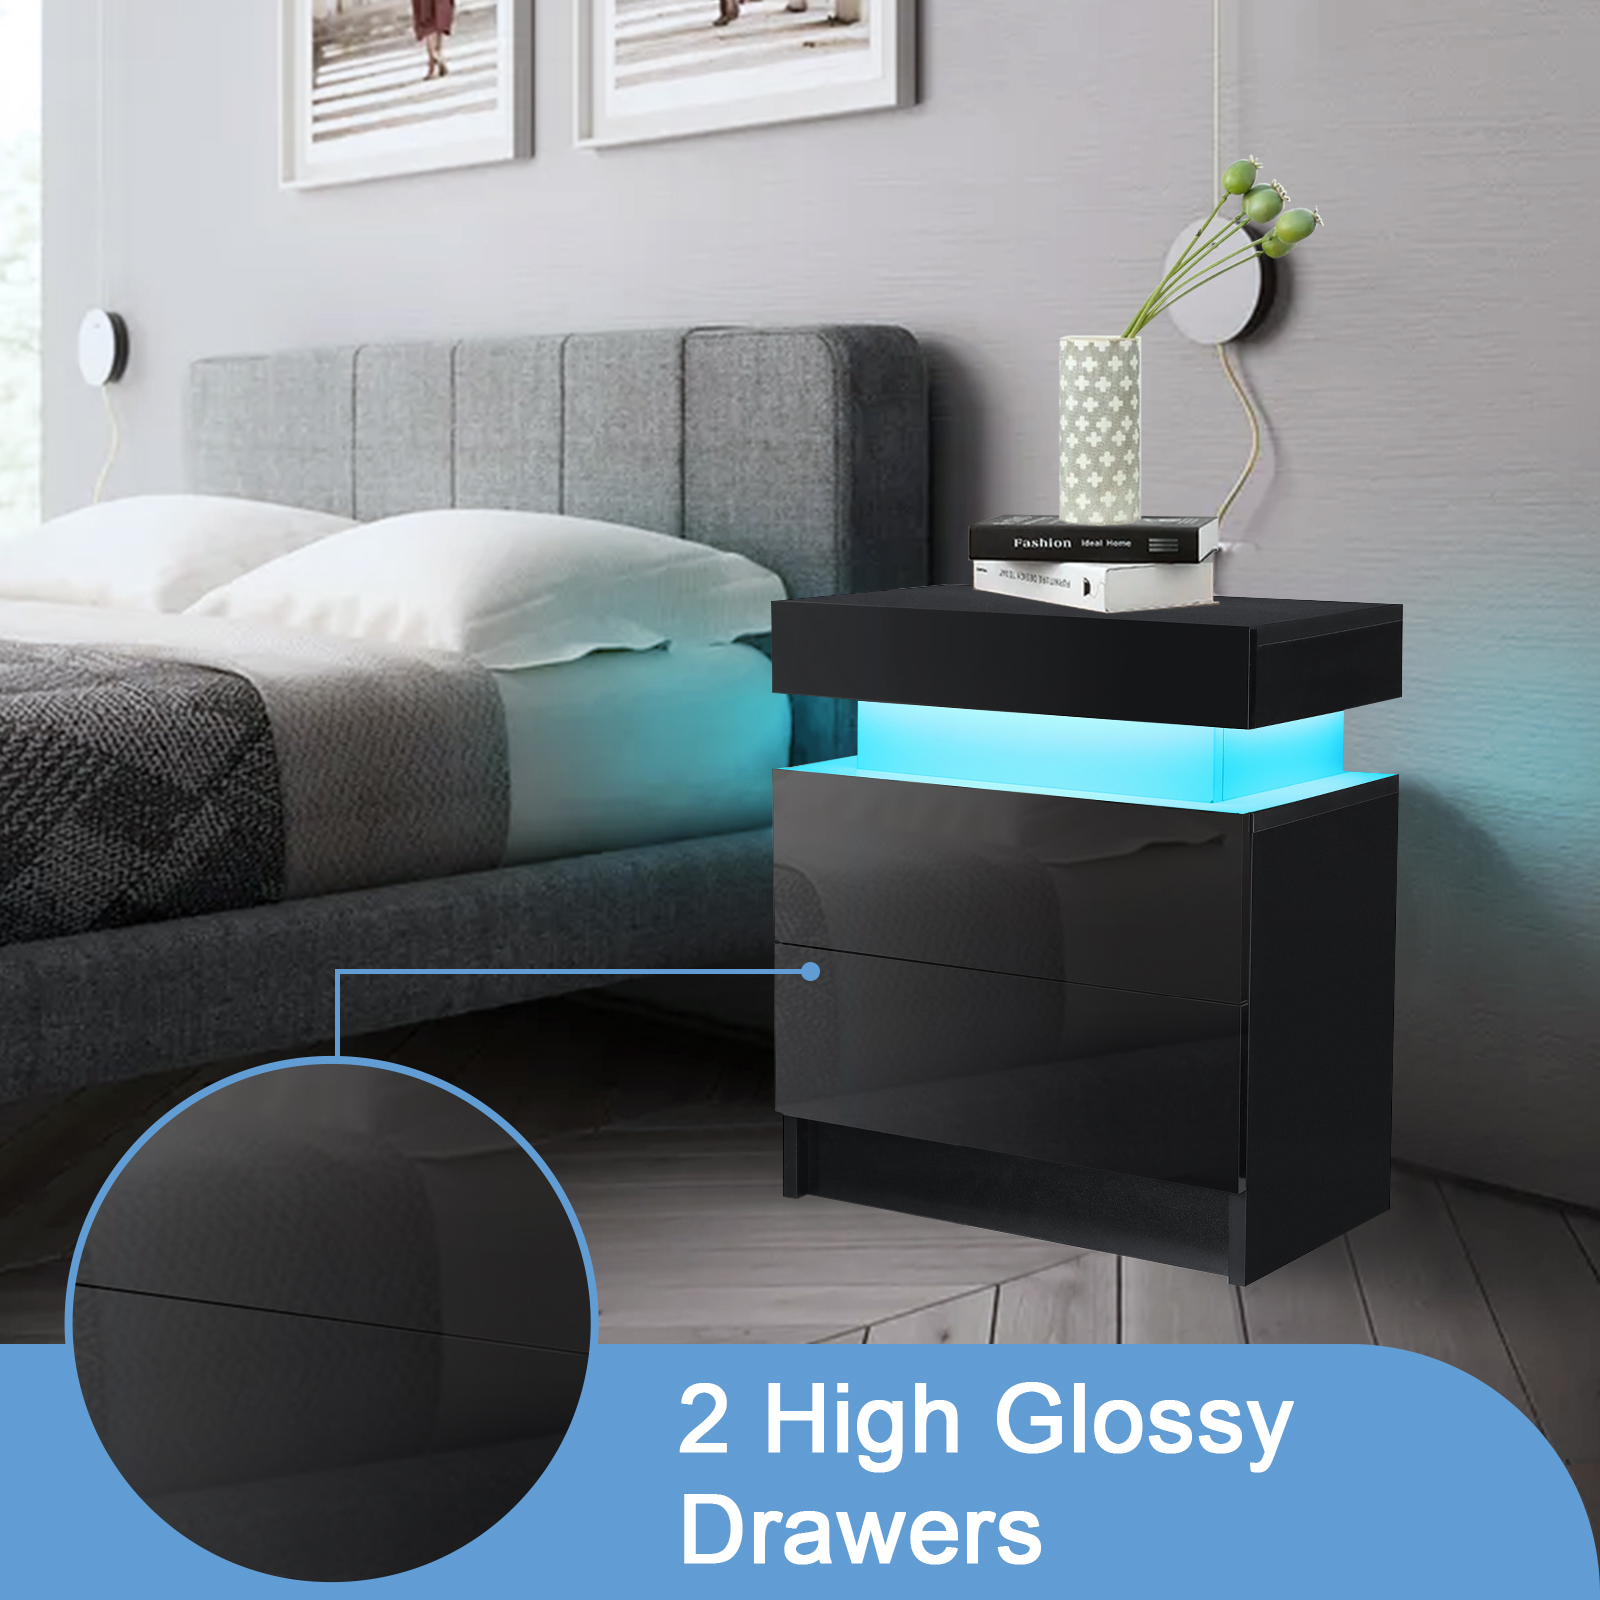 LED Bedside Table with Drawer - Black Gloss Finish